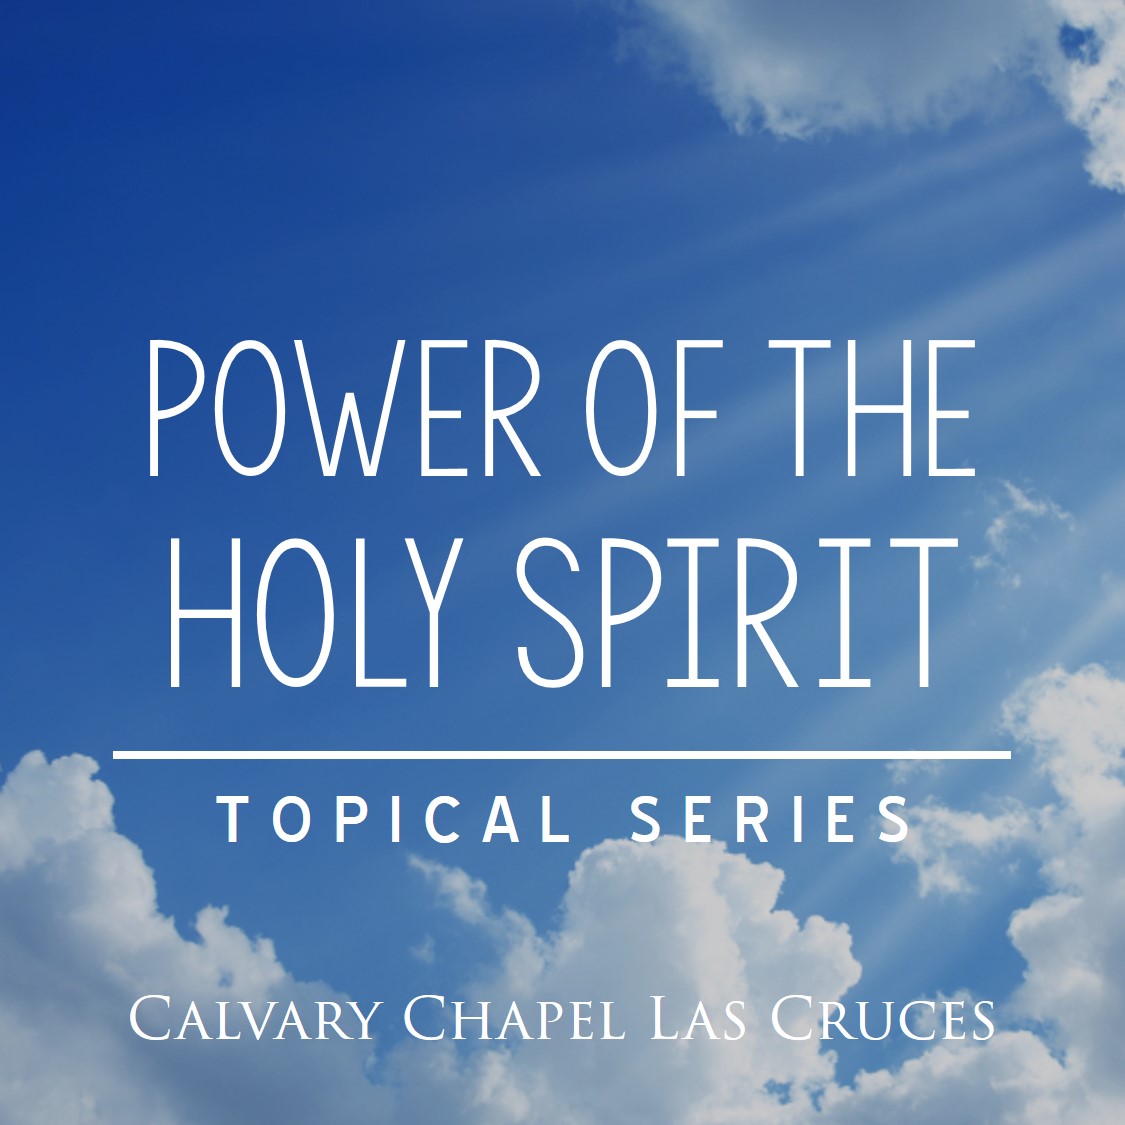 The Power of the Holy Spirit, Part 15